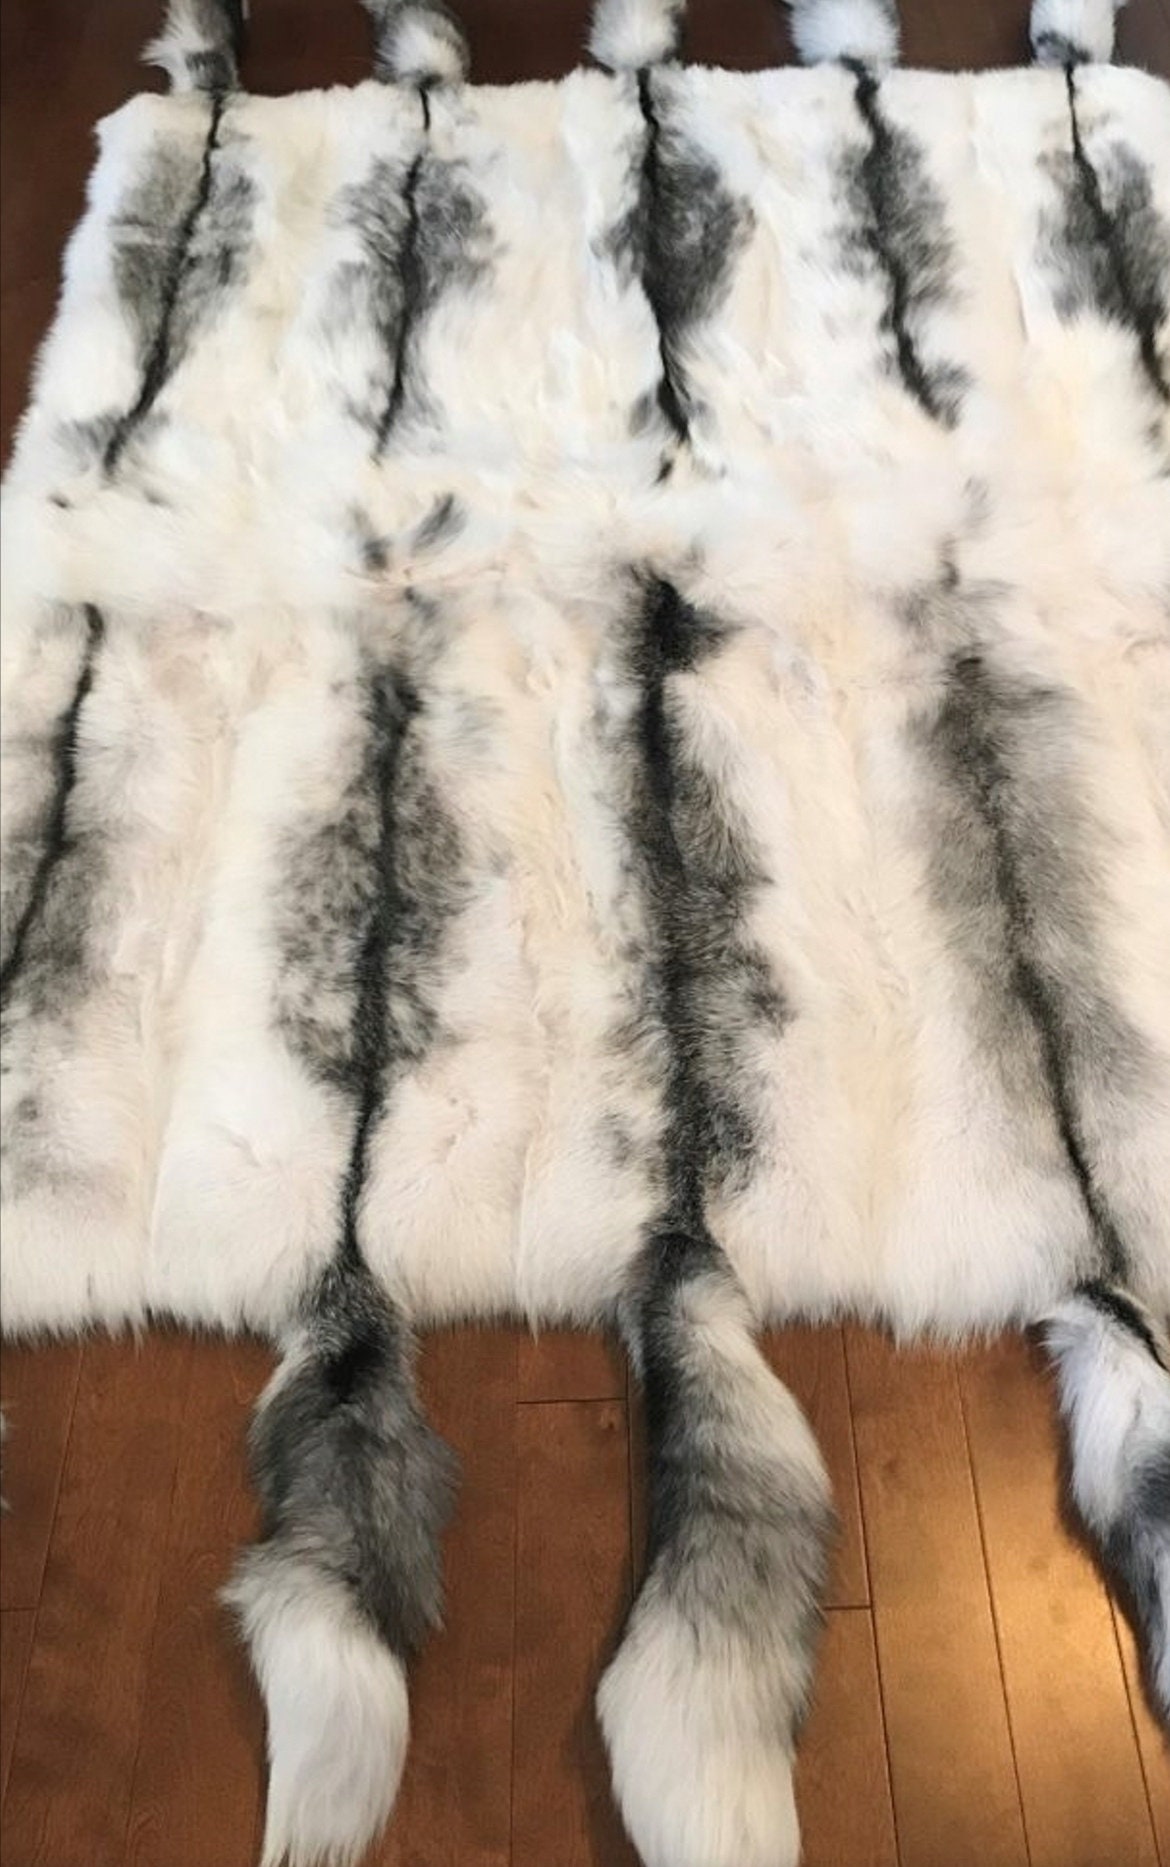 LUXURY BLUE FOX Coat Black ,fur Coat With Whole Skins,fur Jacket, Luxury  Fur Coat,available in Various Fox Colours,perfect Gift,present 